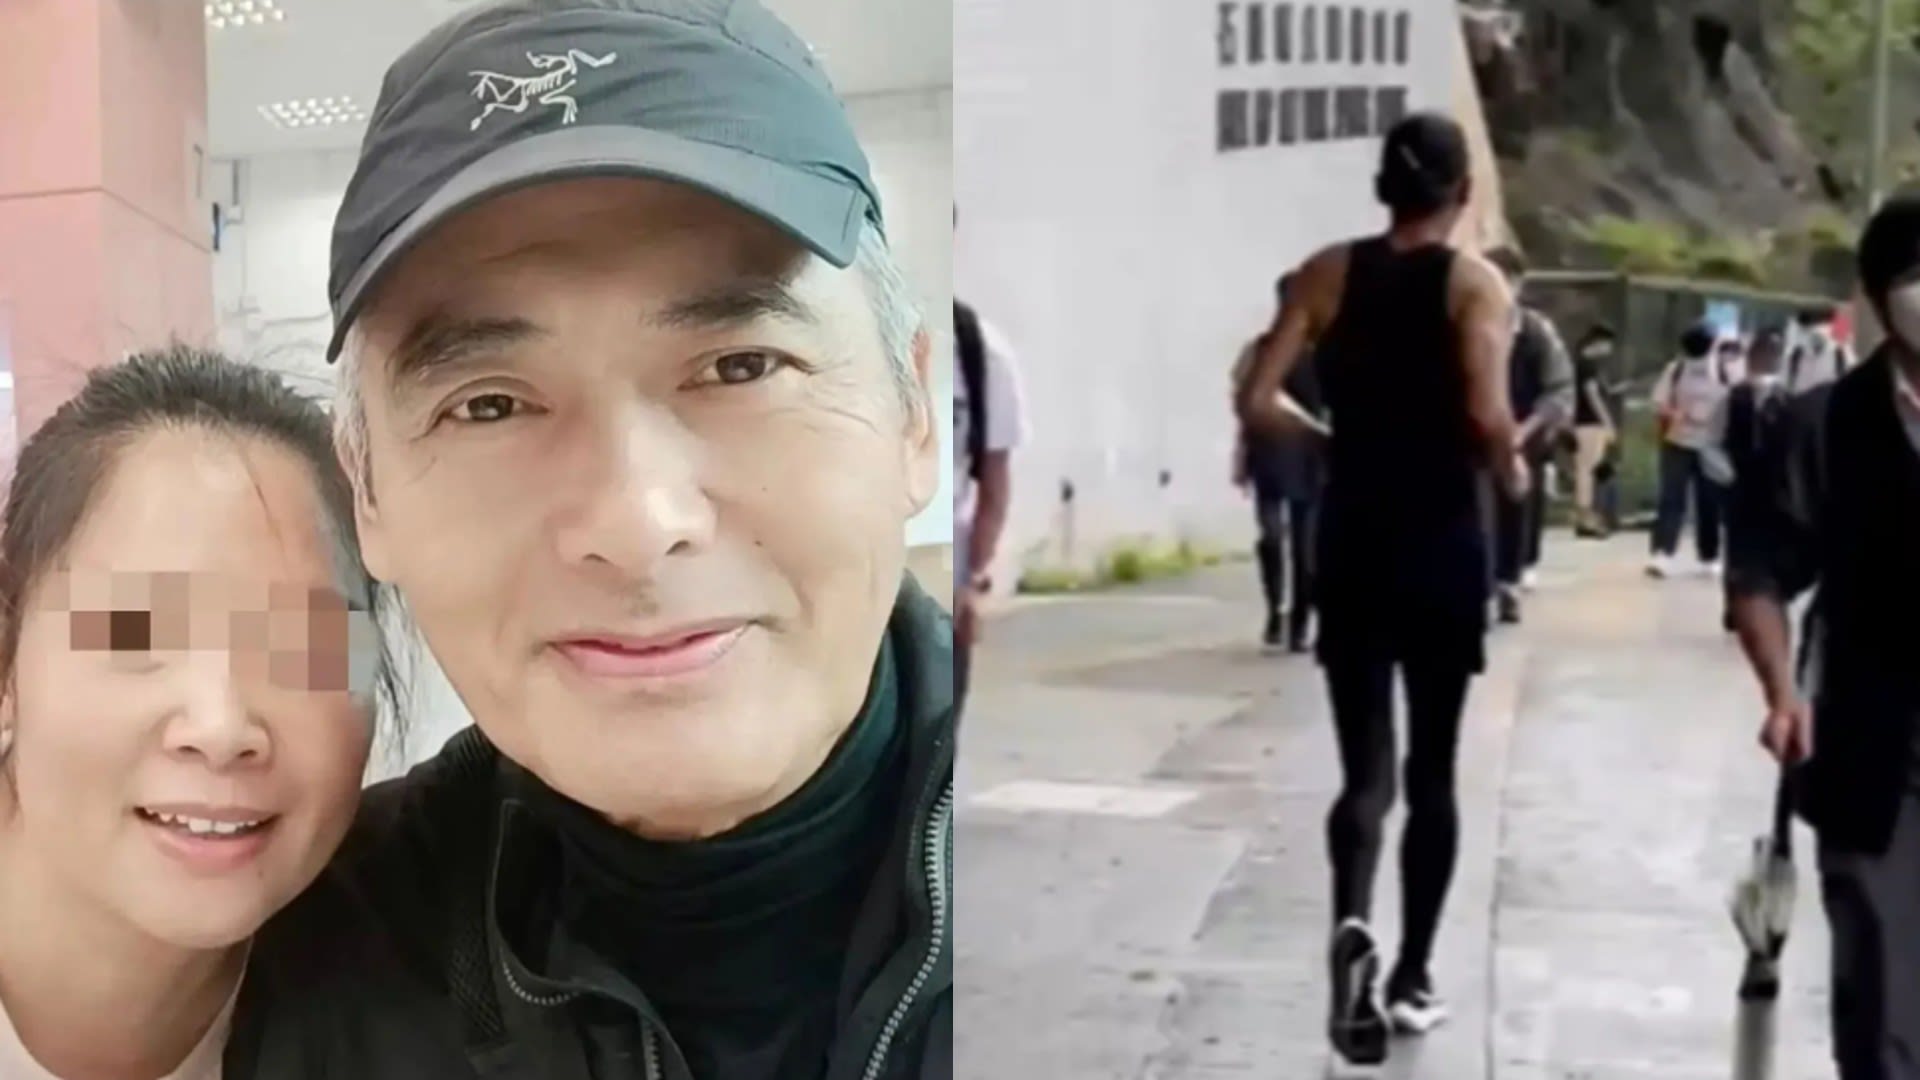 Netizen Snaps Pics Of Chow Yun Fat, 67, Looking Really Fit While Out Jogging